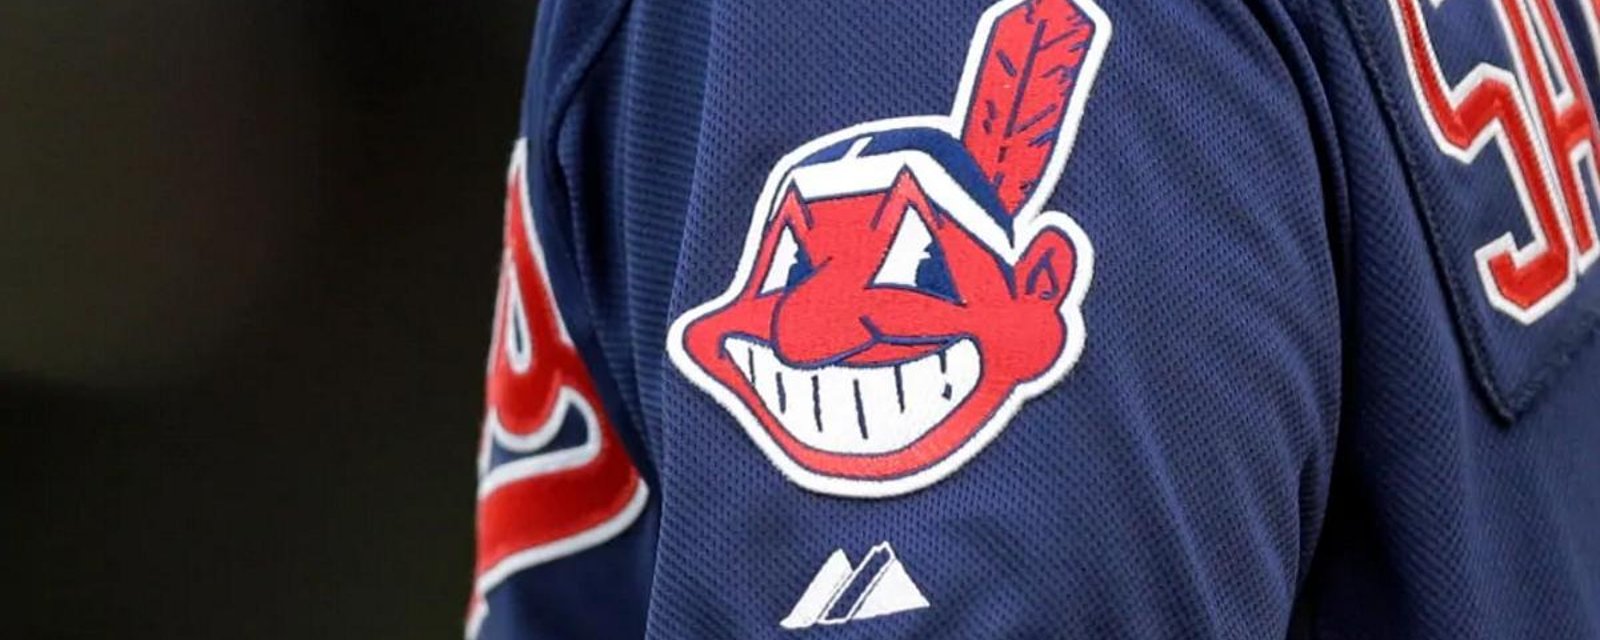 Cleveland Indians abandon their team name, are the Blackhawks next?